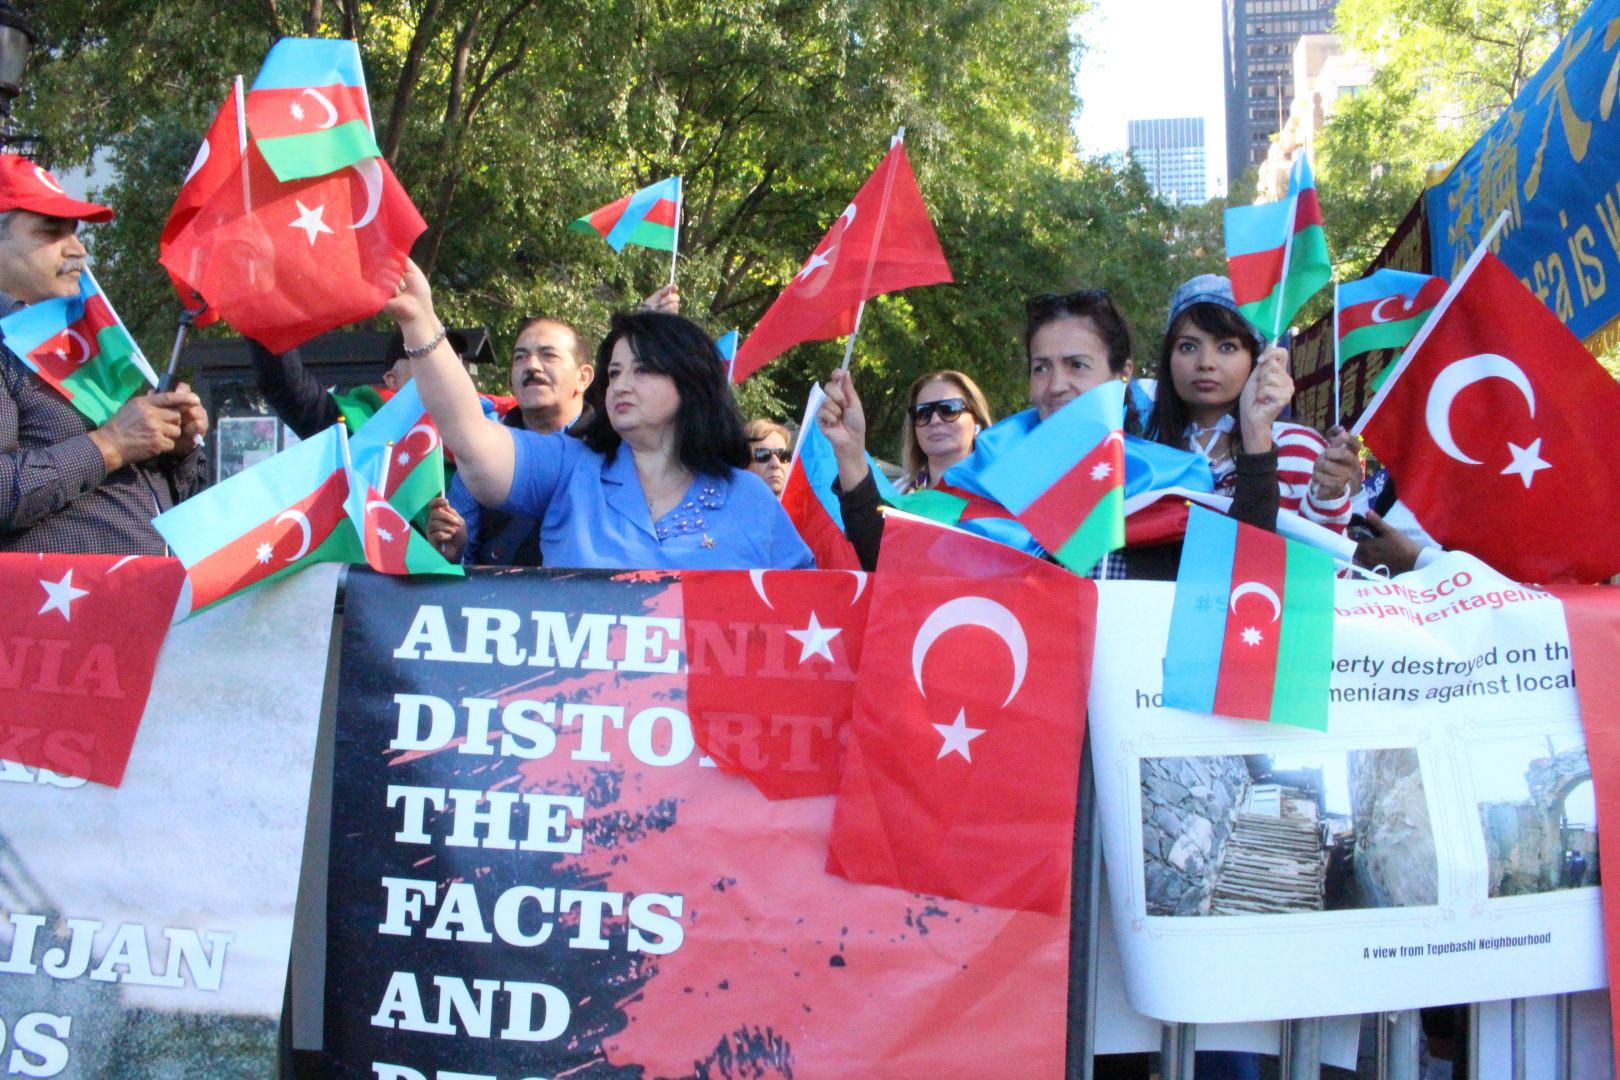 Azerbaijani community protests against Armenian provocations in front of UN headquarters (PHOTO)